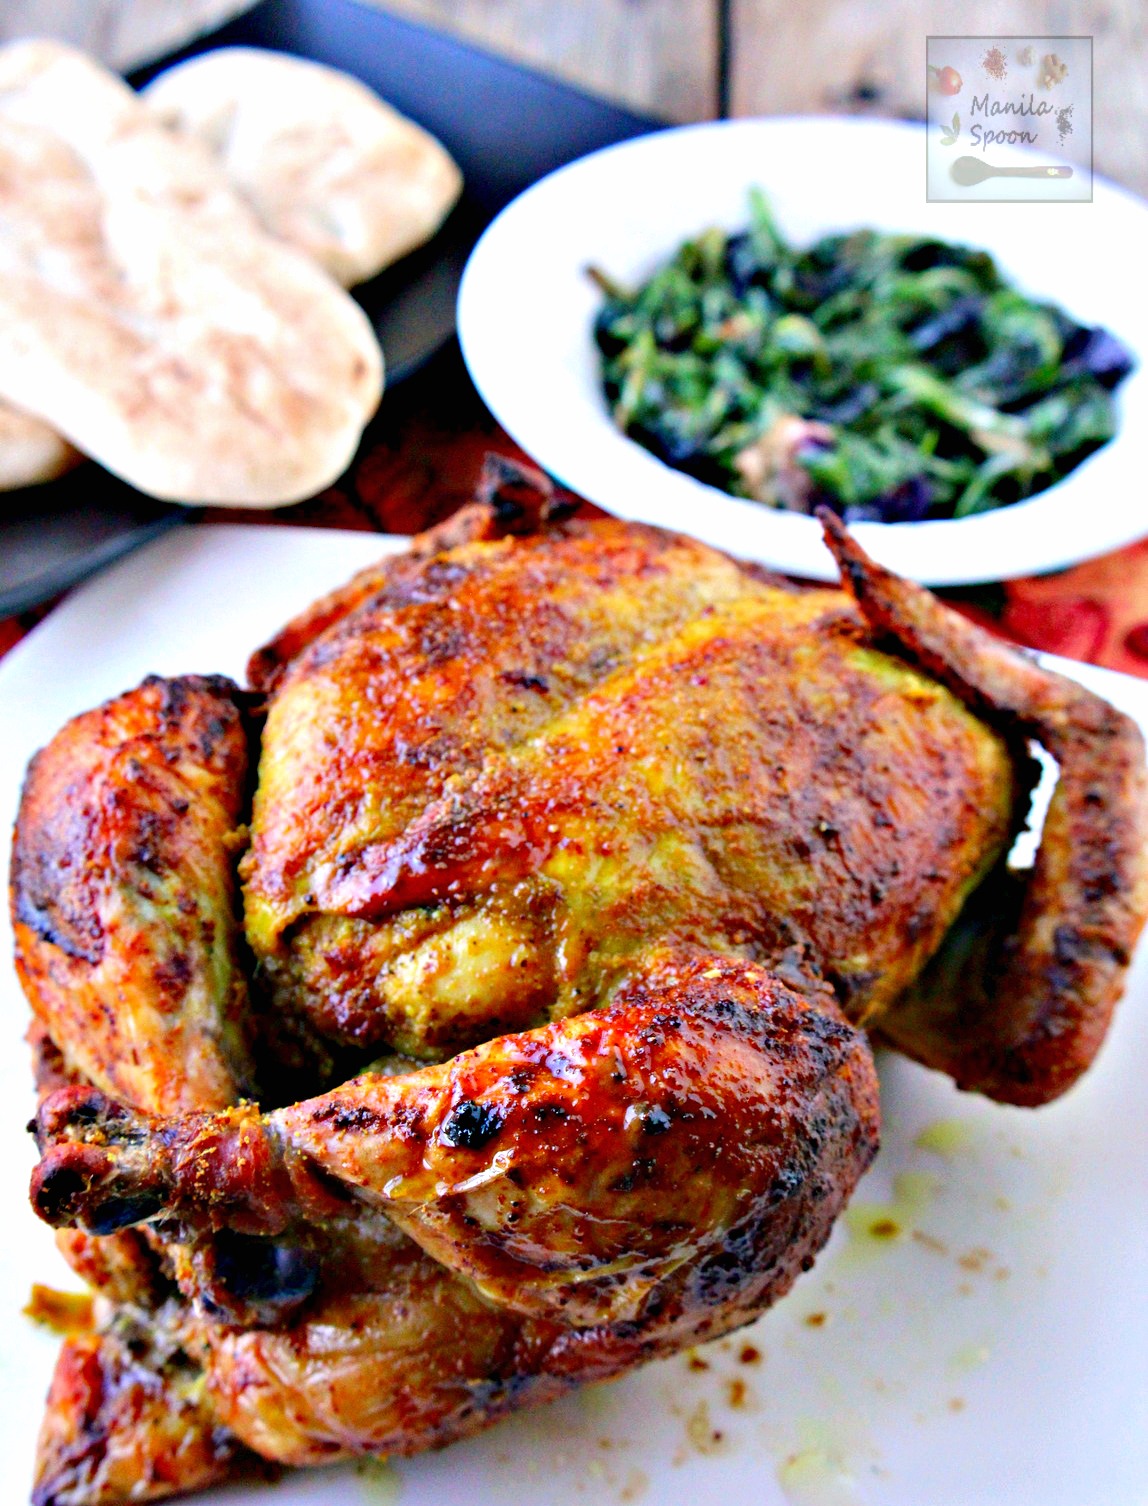 Flavored with aromatic spices, this whole roast Masala Chicken (Indian-style) comes out so yummy! The skin is deliciously crisp and the meat is tender and moist. This roast is very easy and quick to prepare, too. | manilaspoon.com